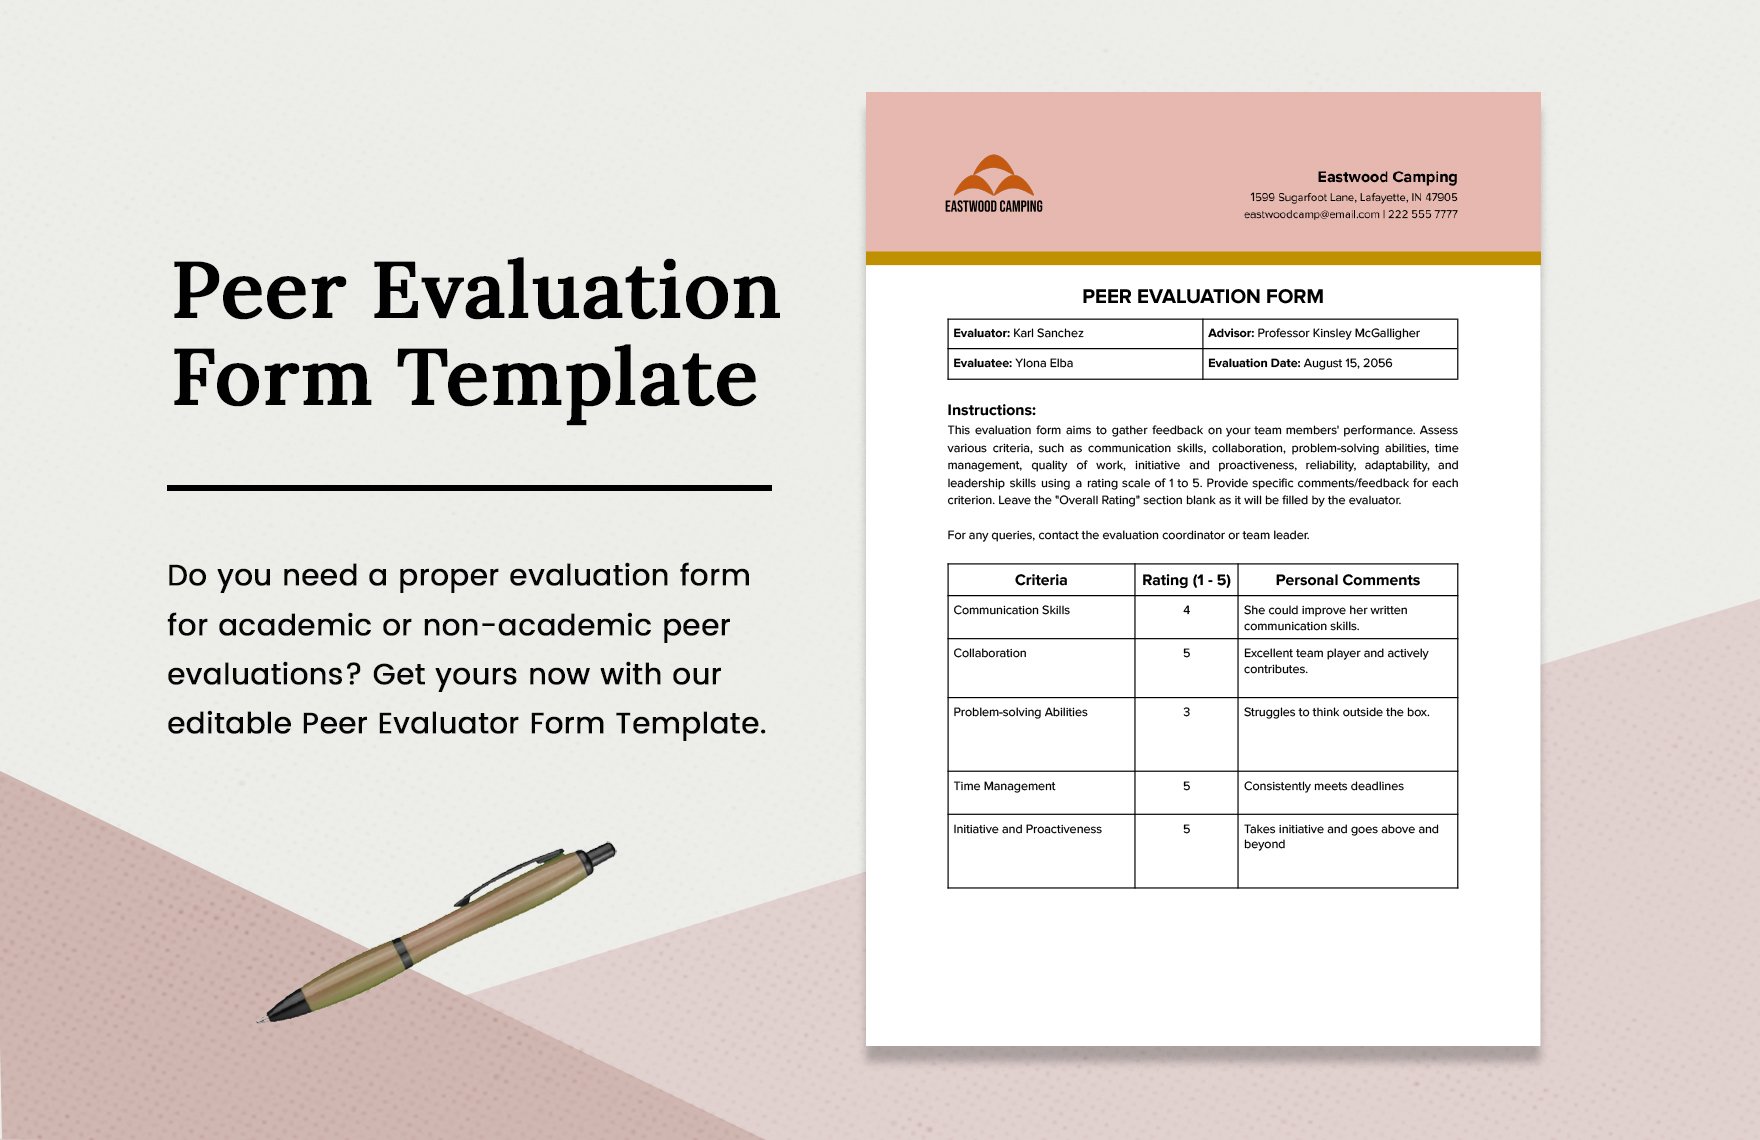 Free Peer Evaluation Form Template in Word, Google Docs, PDF